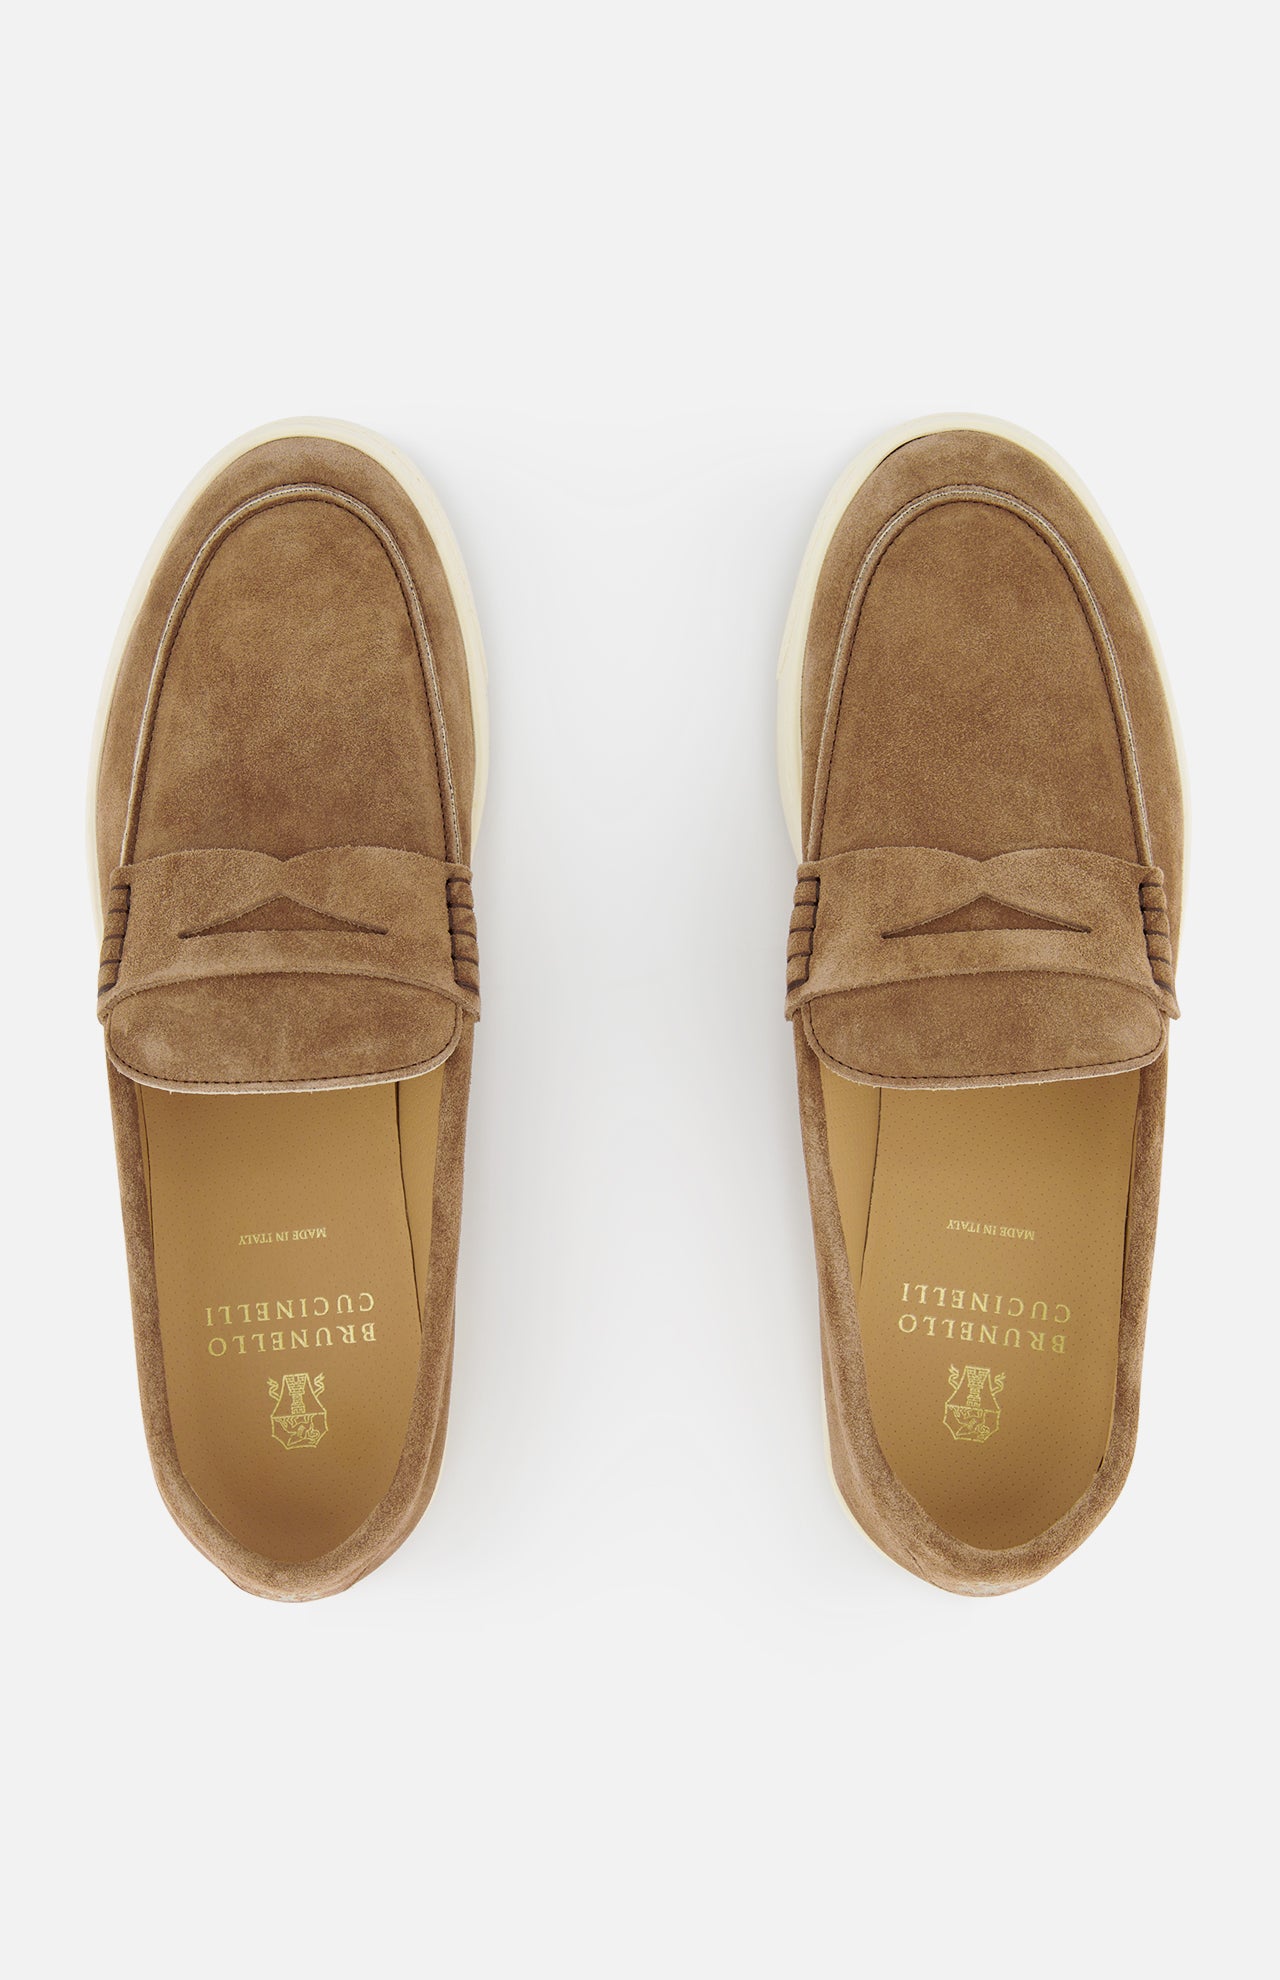 Loafers (7366529253491)